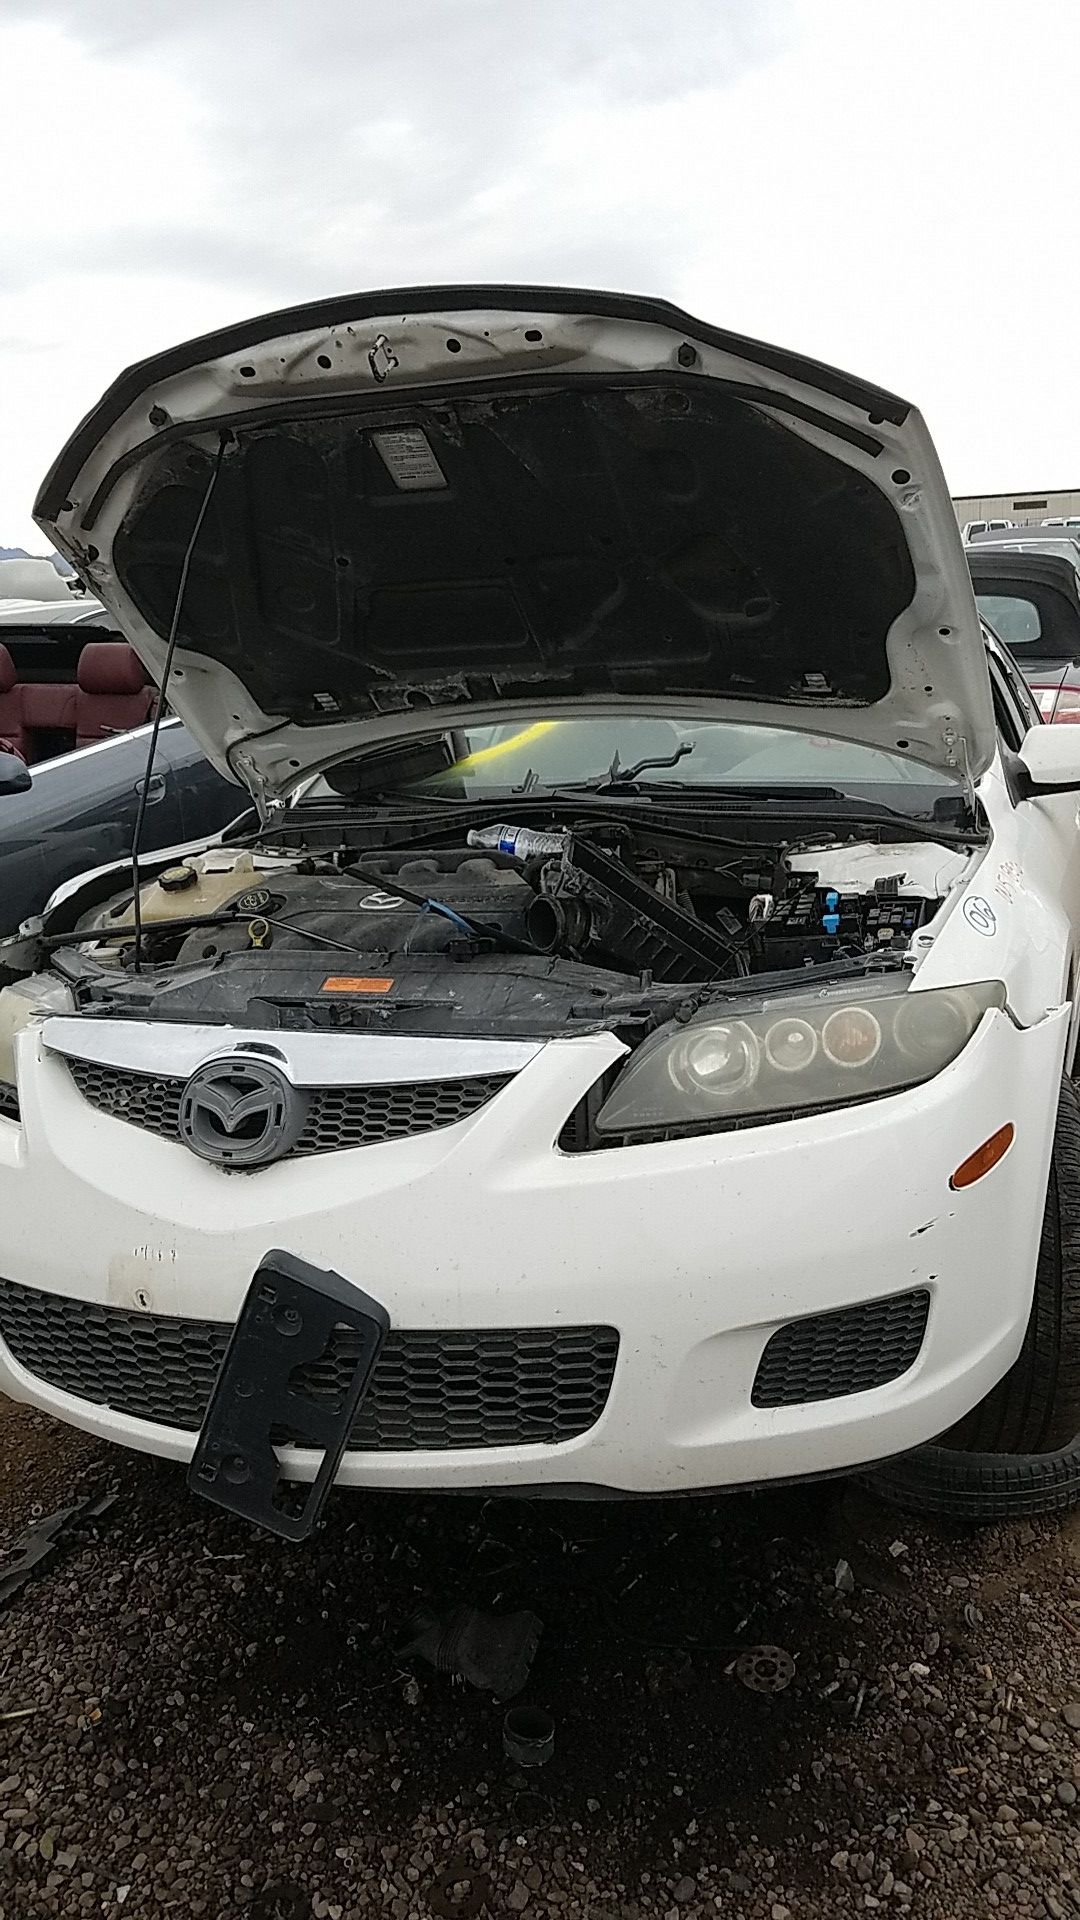 06 Mazda 6 - Parting out only